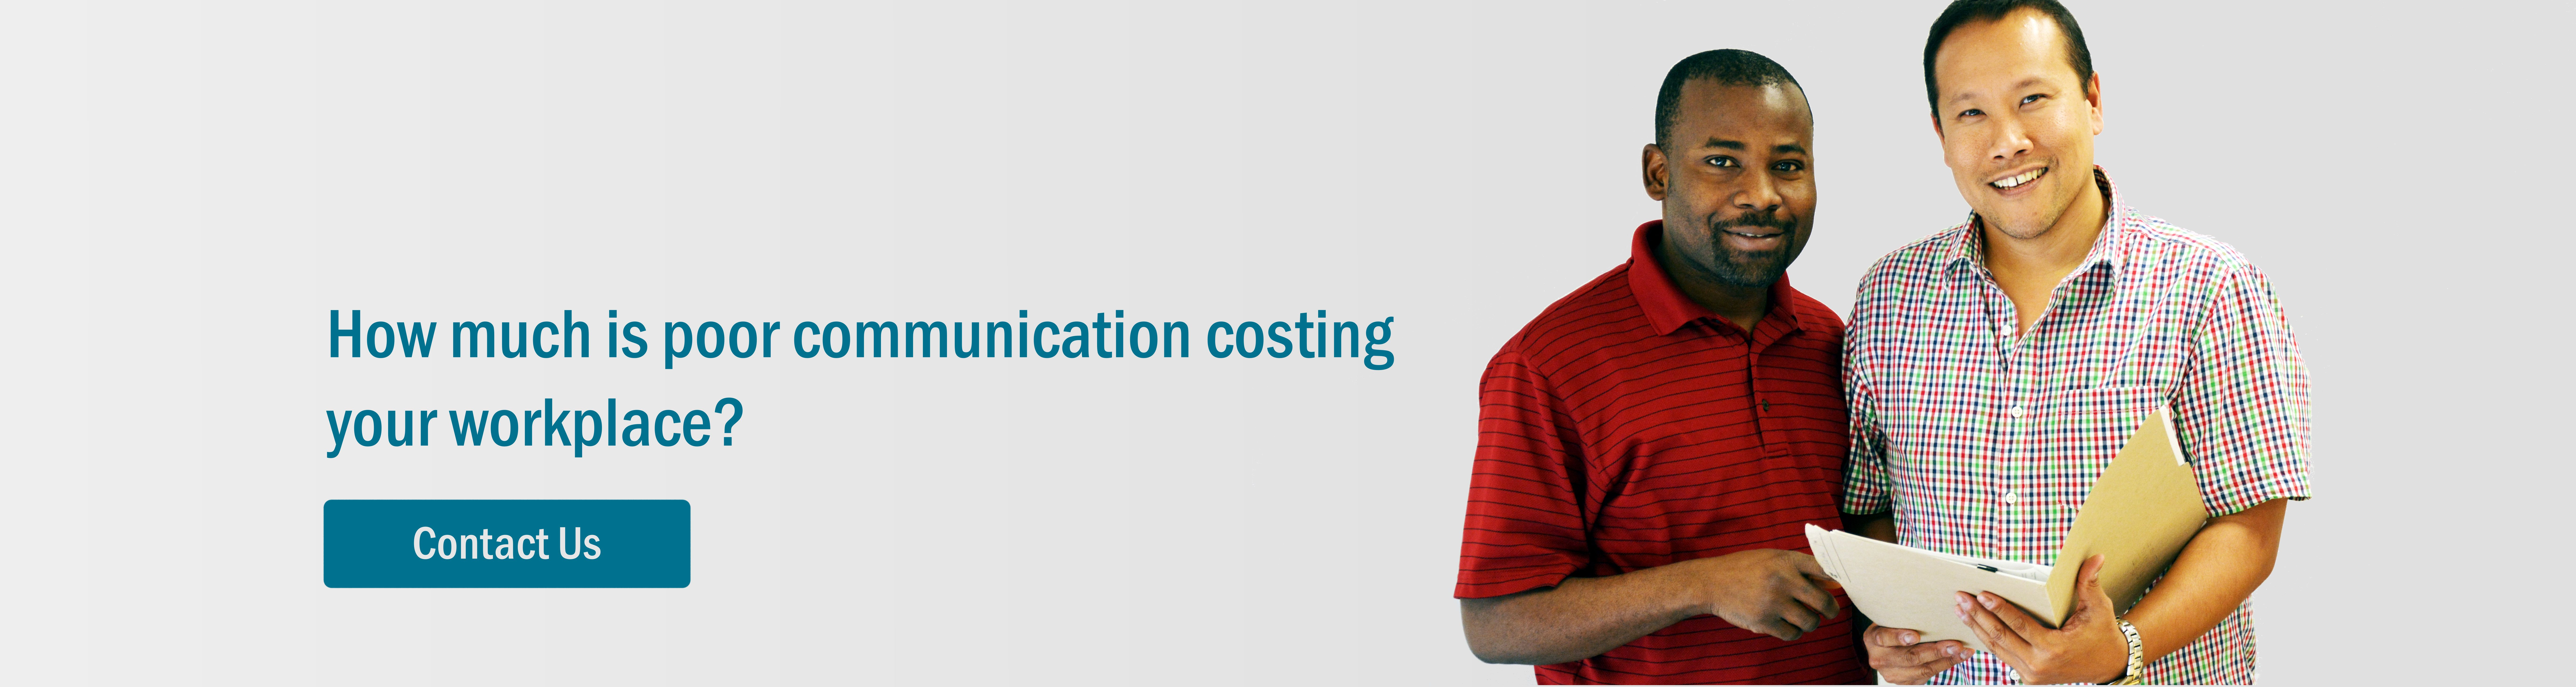 How much is poor communication costing your workplace?